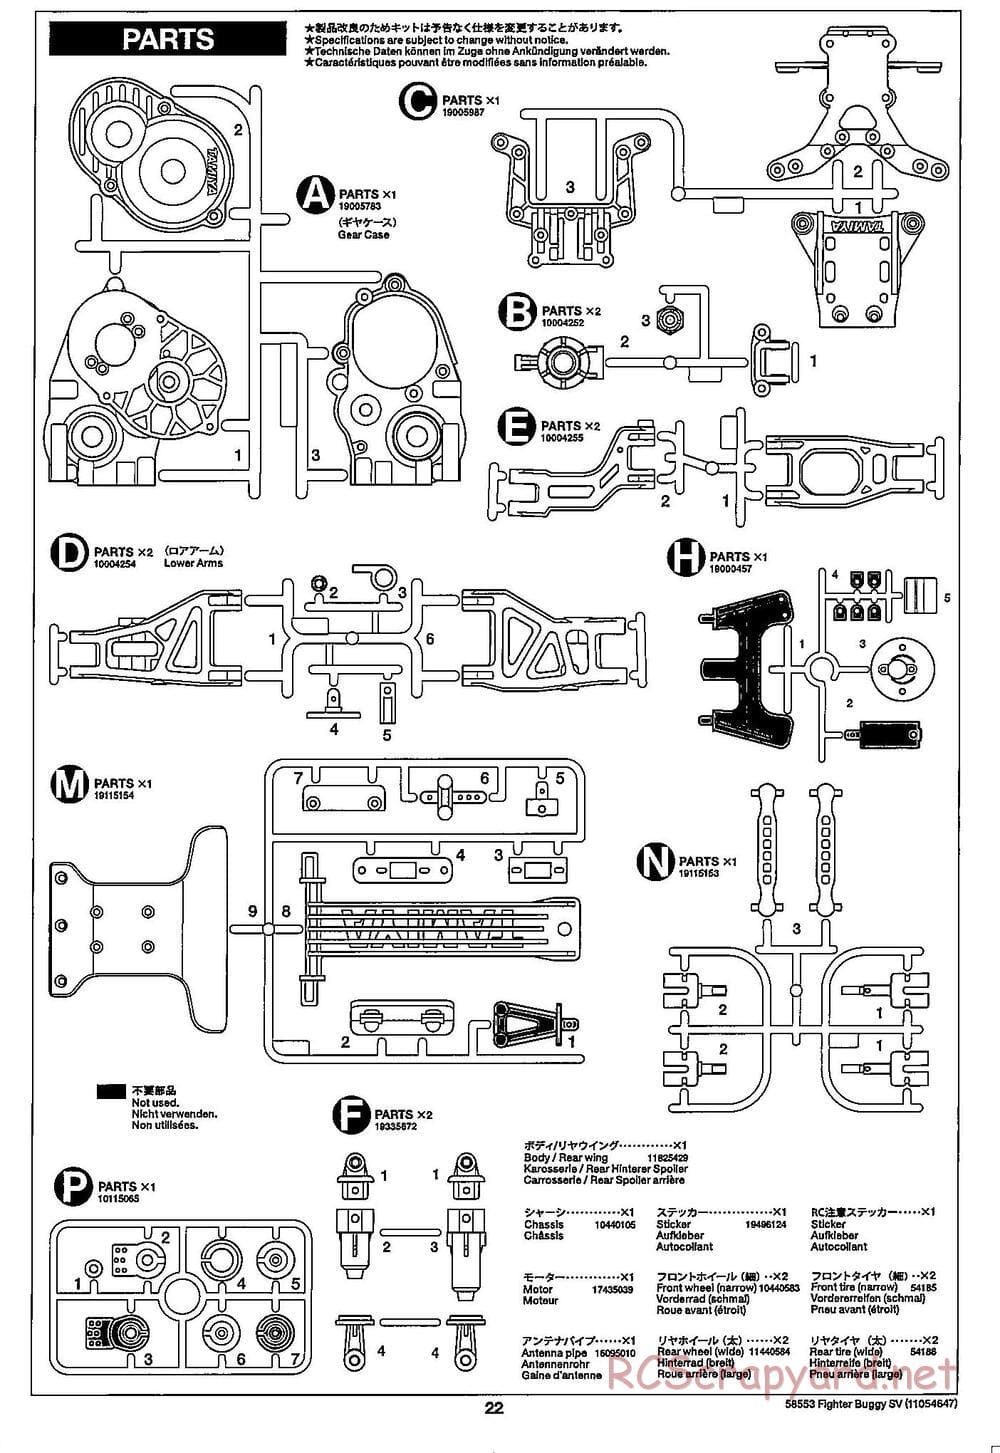 Tamiya - Fighter Buggy SV Chassis - Manual - Page 22